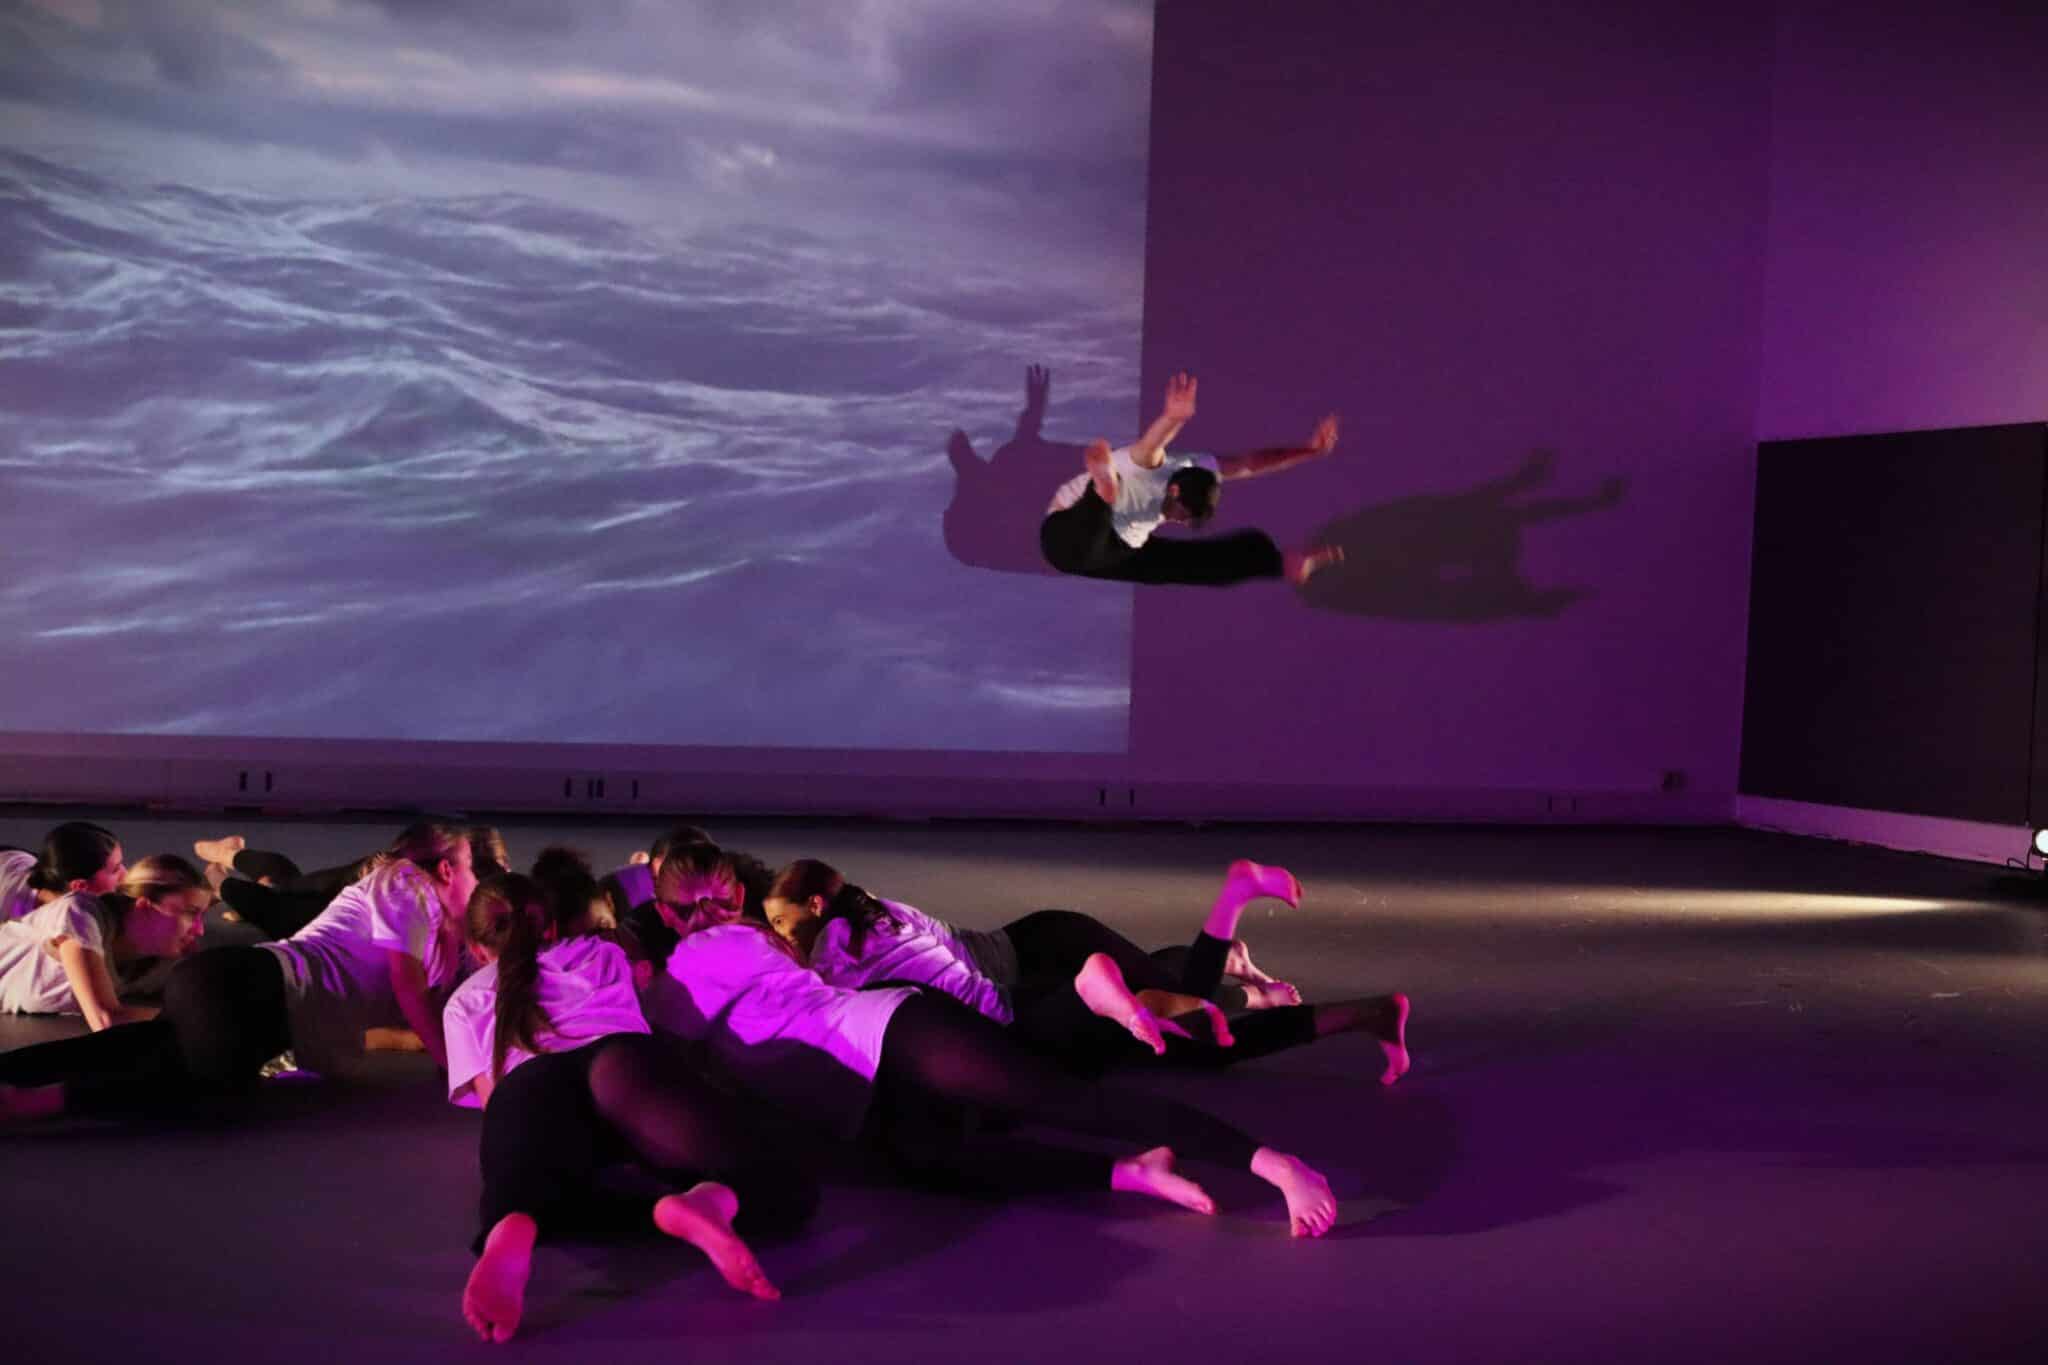 Performing Arts students complete first shows in newly refurbished theatres - Dance show